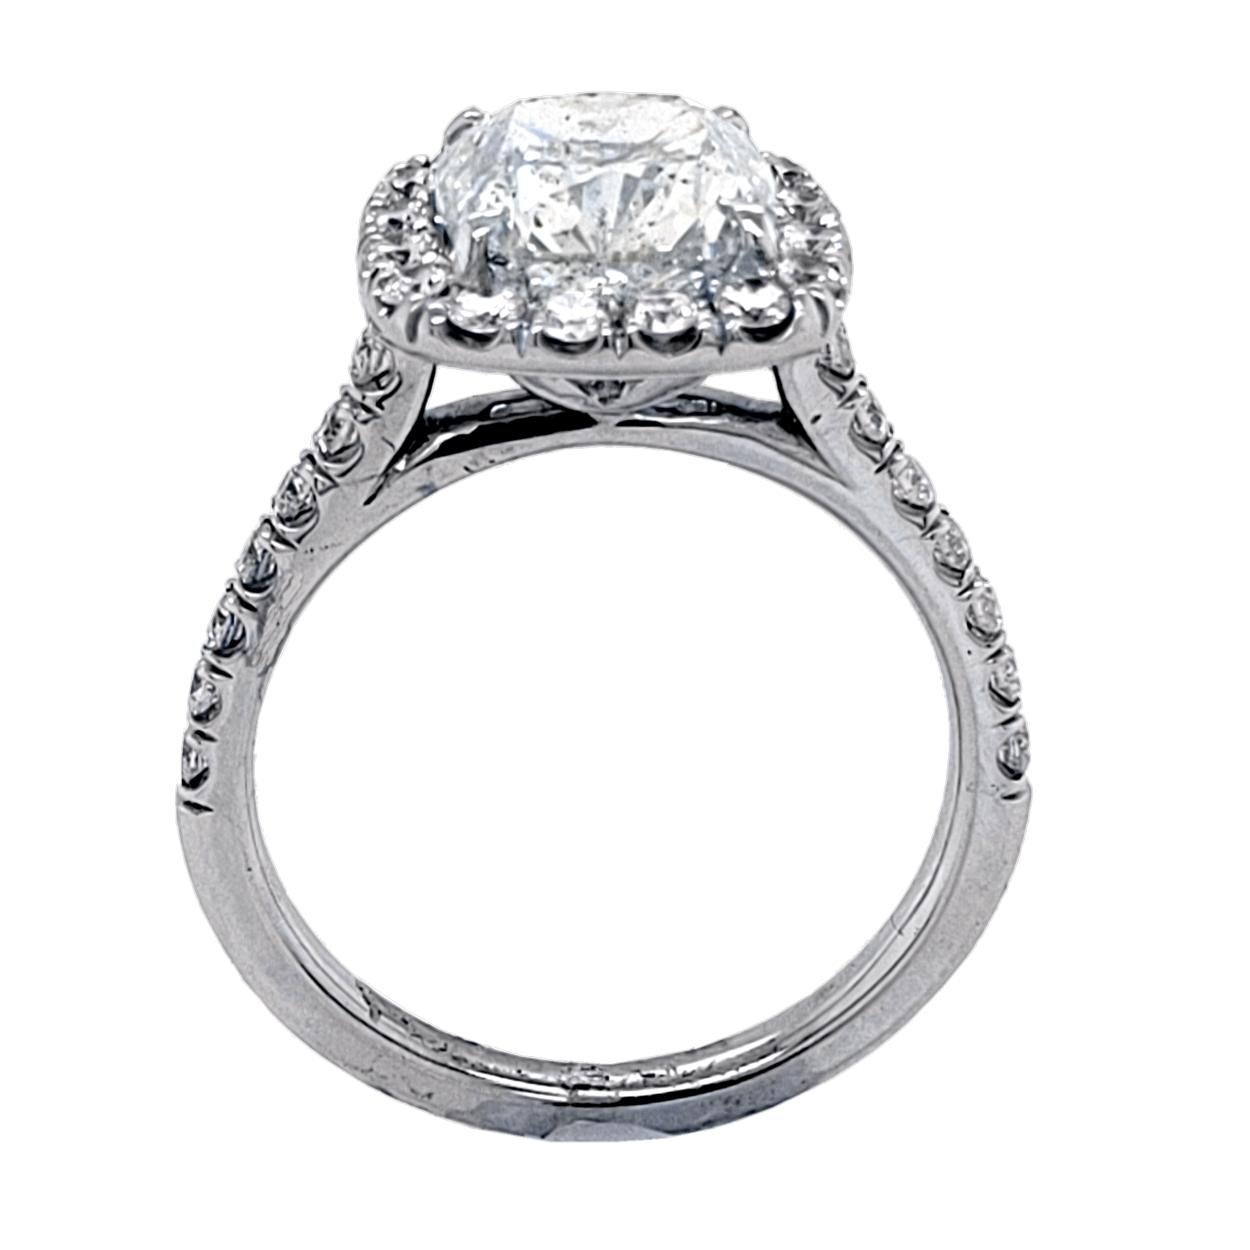 EGL US 3.01 Carat E/SI3 Cushion Diamond 18 Karat Pave Set Ring with Halo In New Condition For Sale In Los Angeles, CA